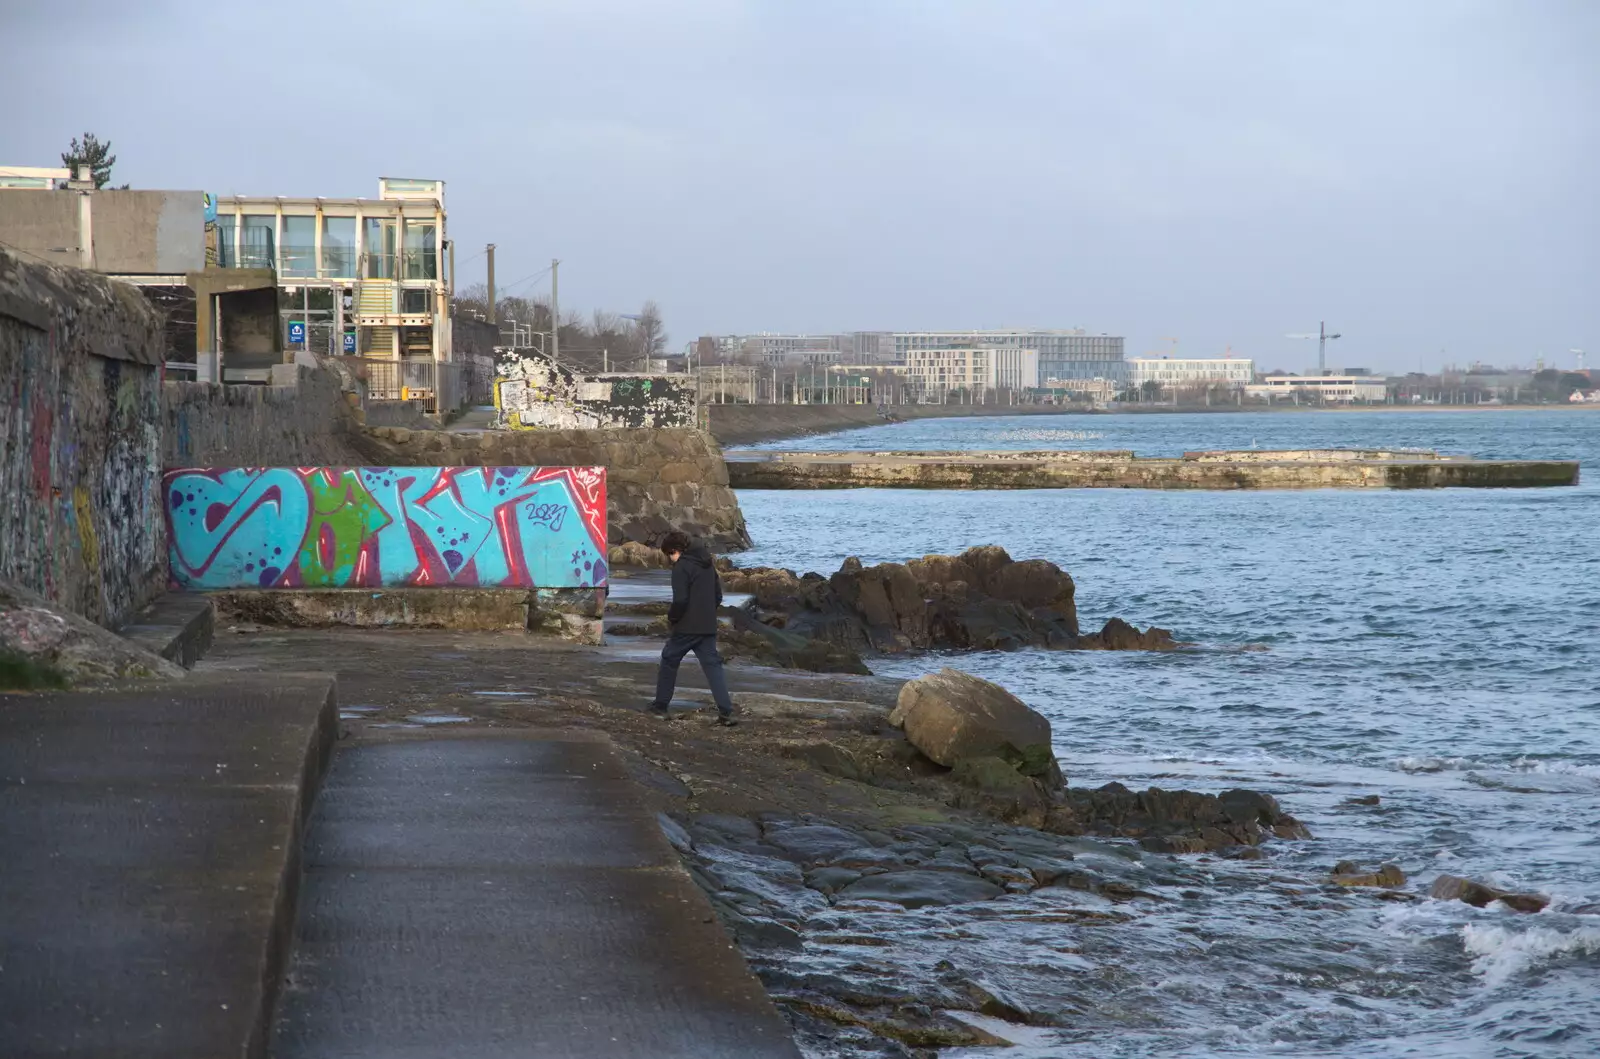 Fred stumps off along the rocks, from The Dead Zoo, Dublin, Ireland - 17th February 2023